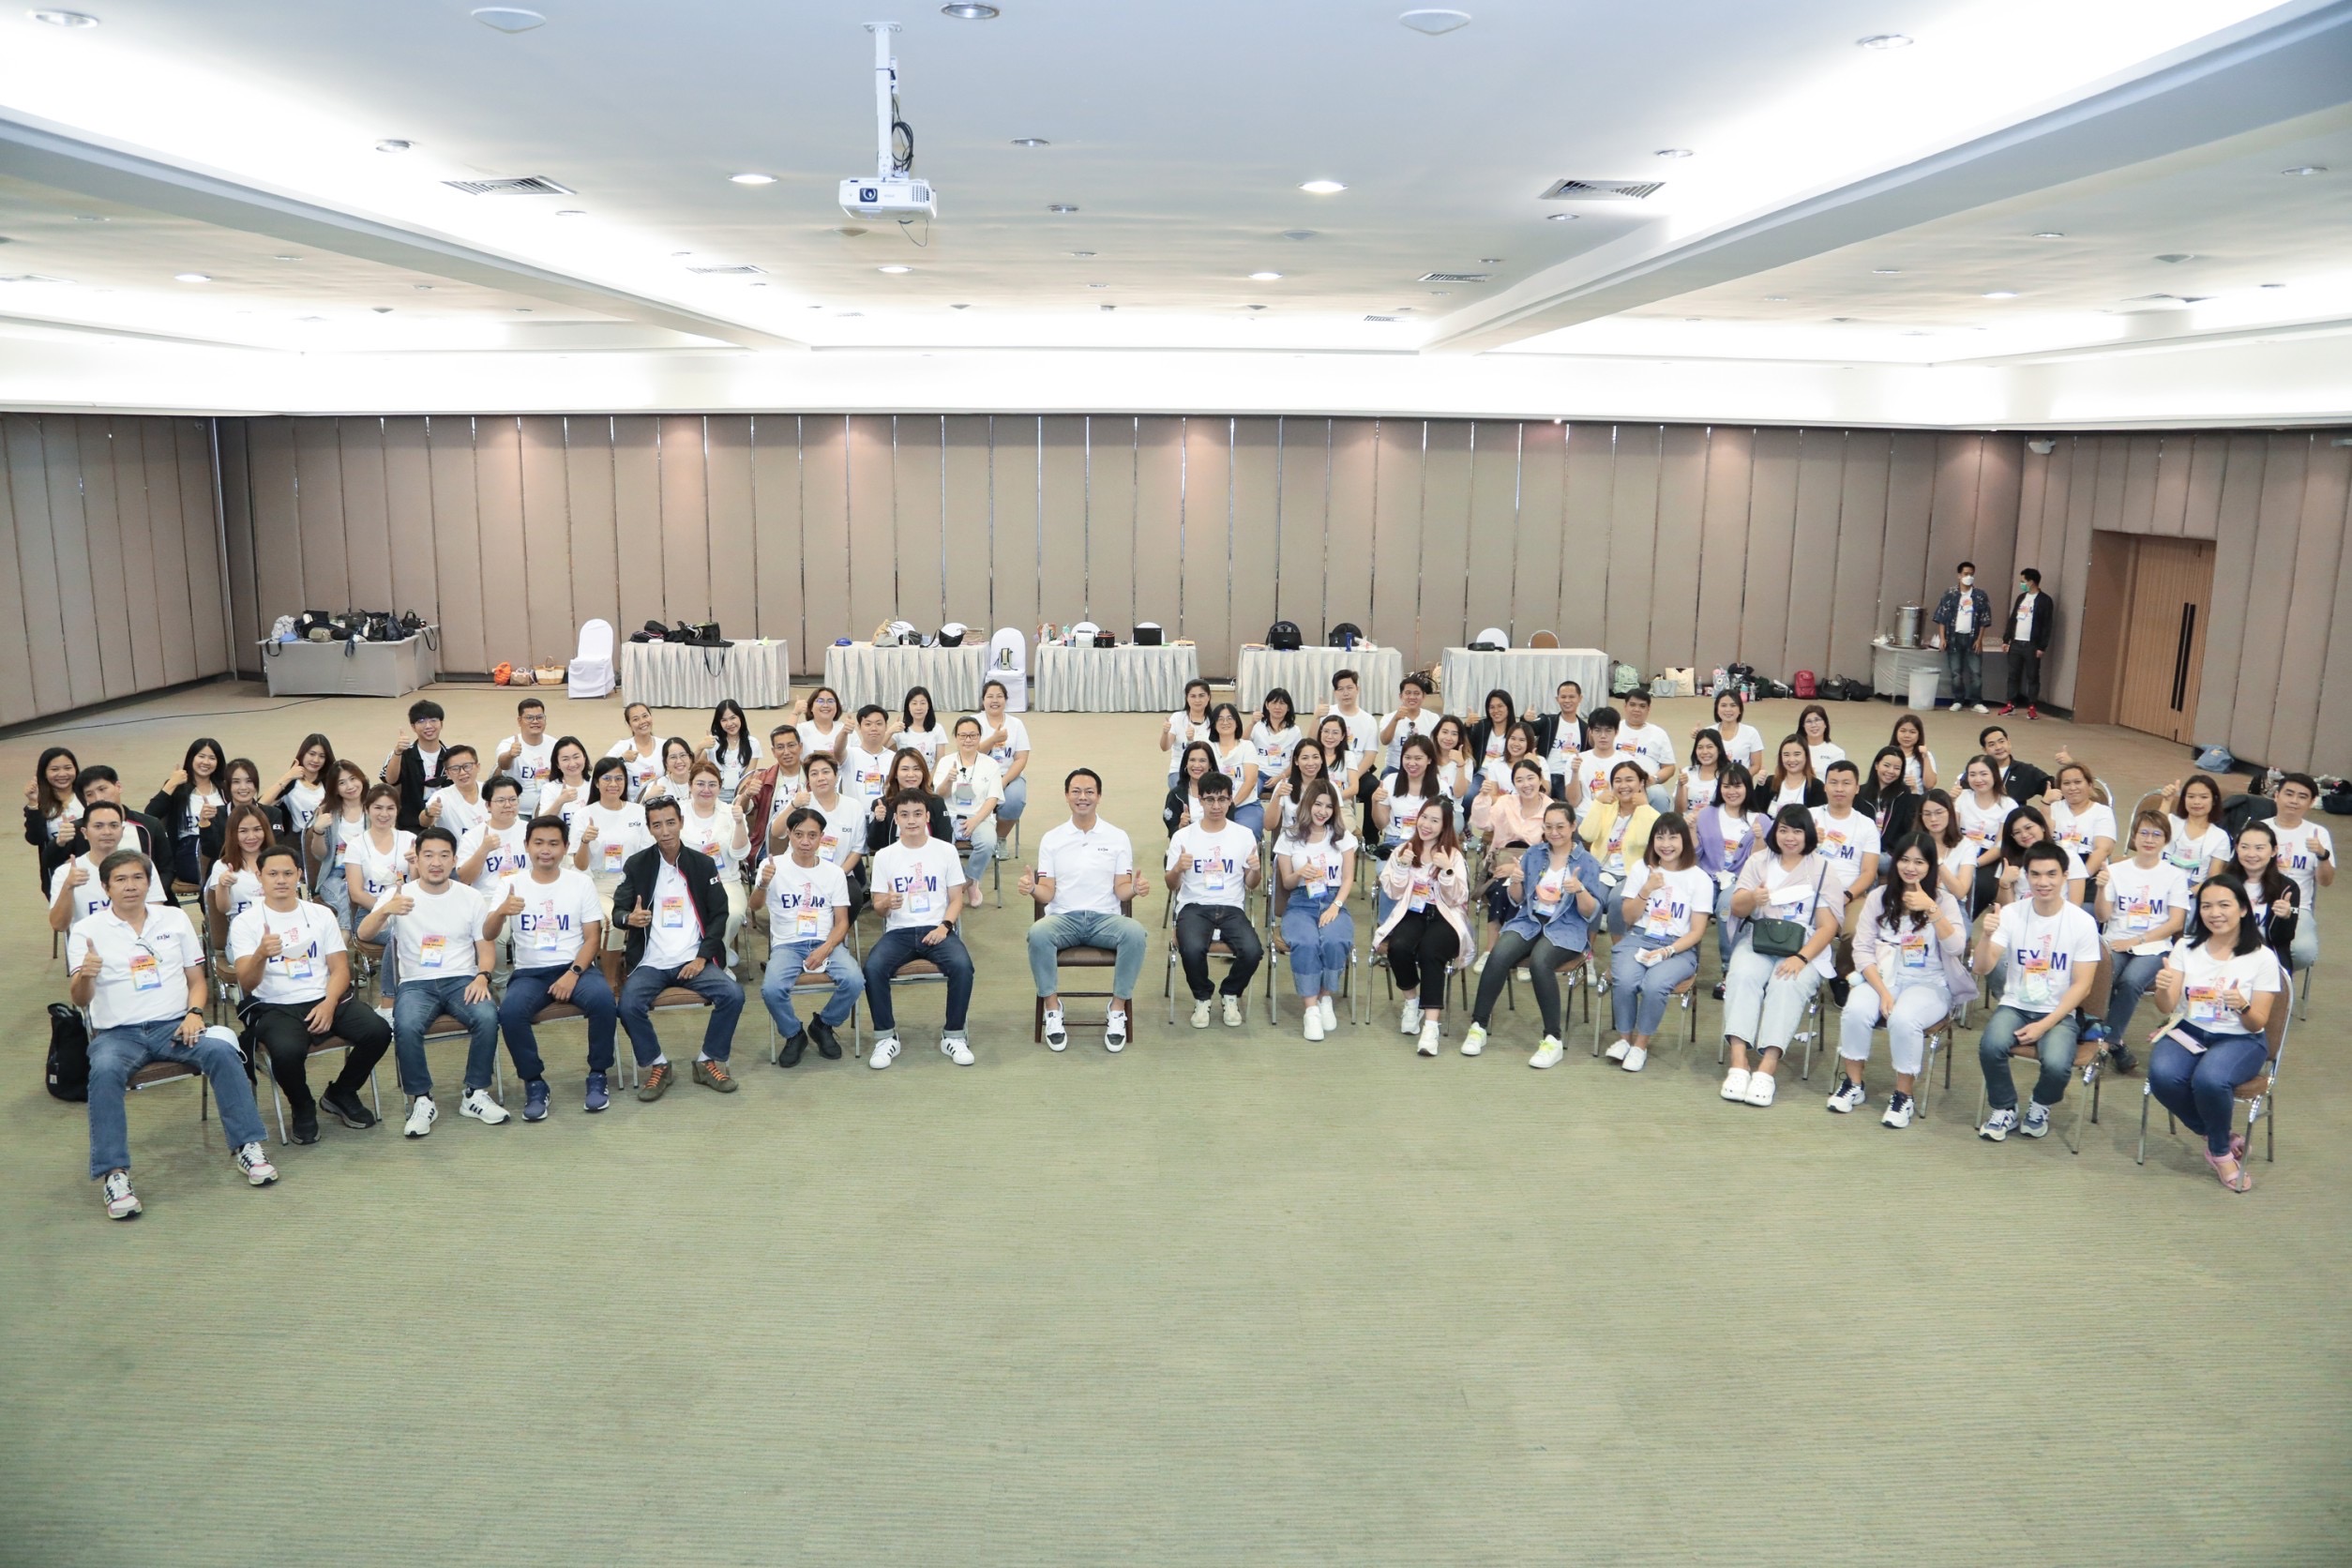 EXIM Thailand Organized Team Building Activity to Stimulate Employees and Management to Drive Sustainable Development